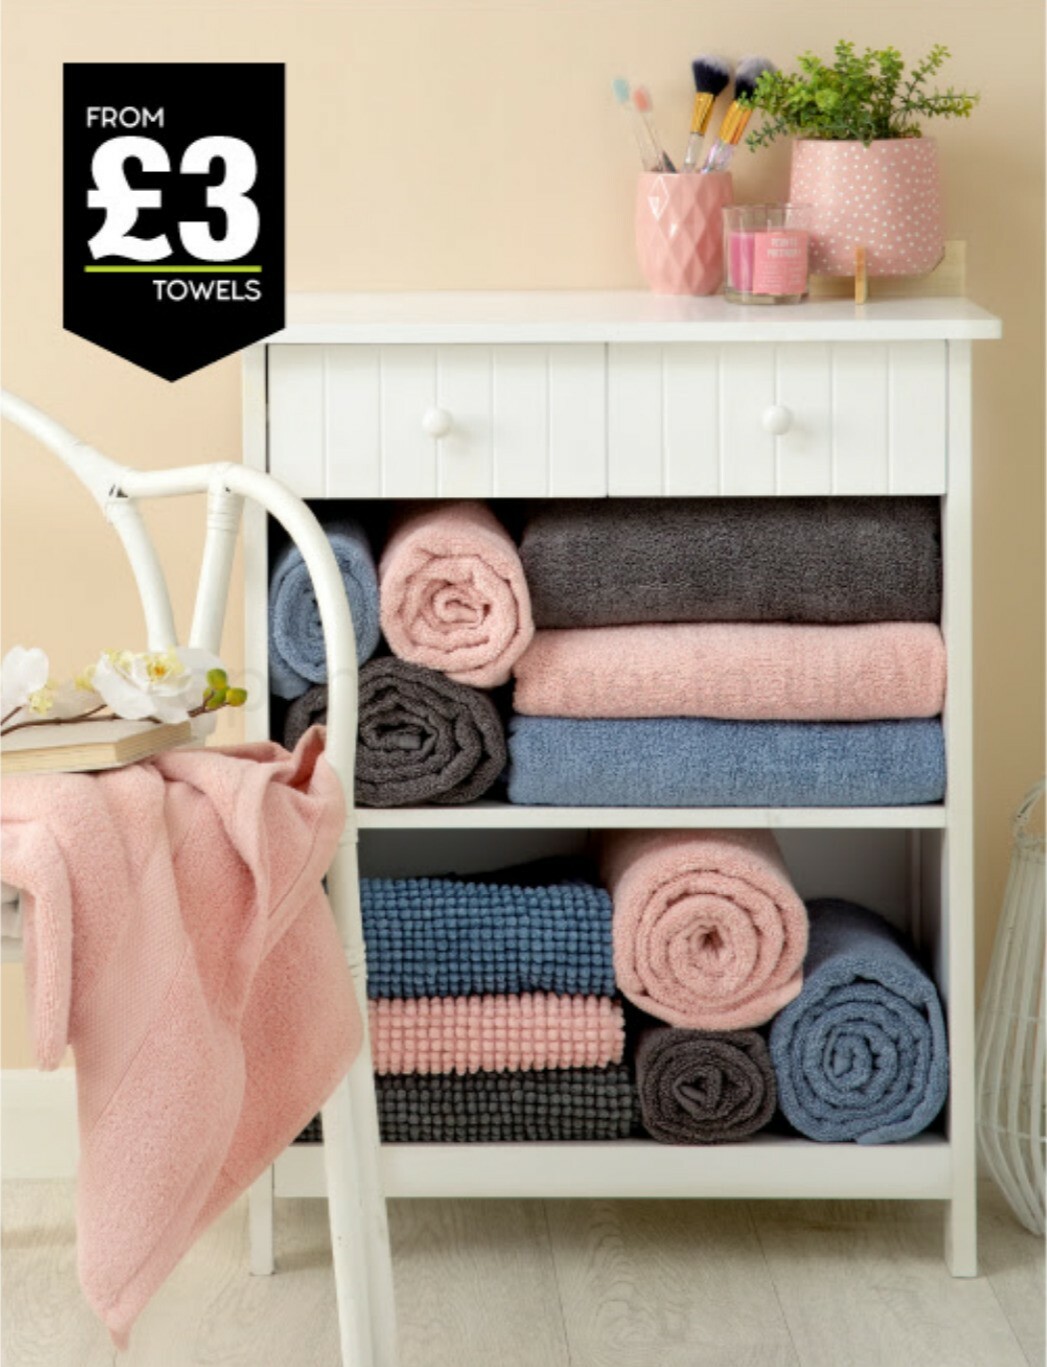 Poundland NEW Pep&Co Home Spring/Summer collection Offers from 8 May